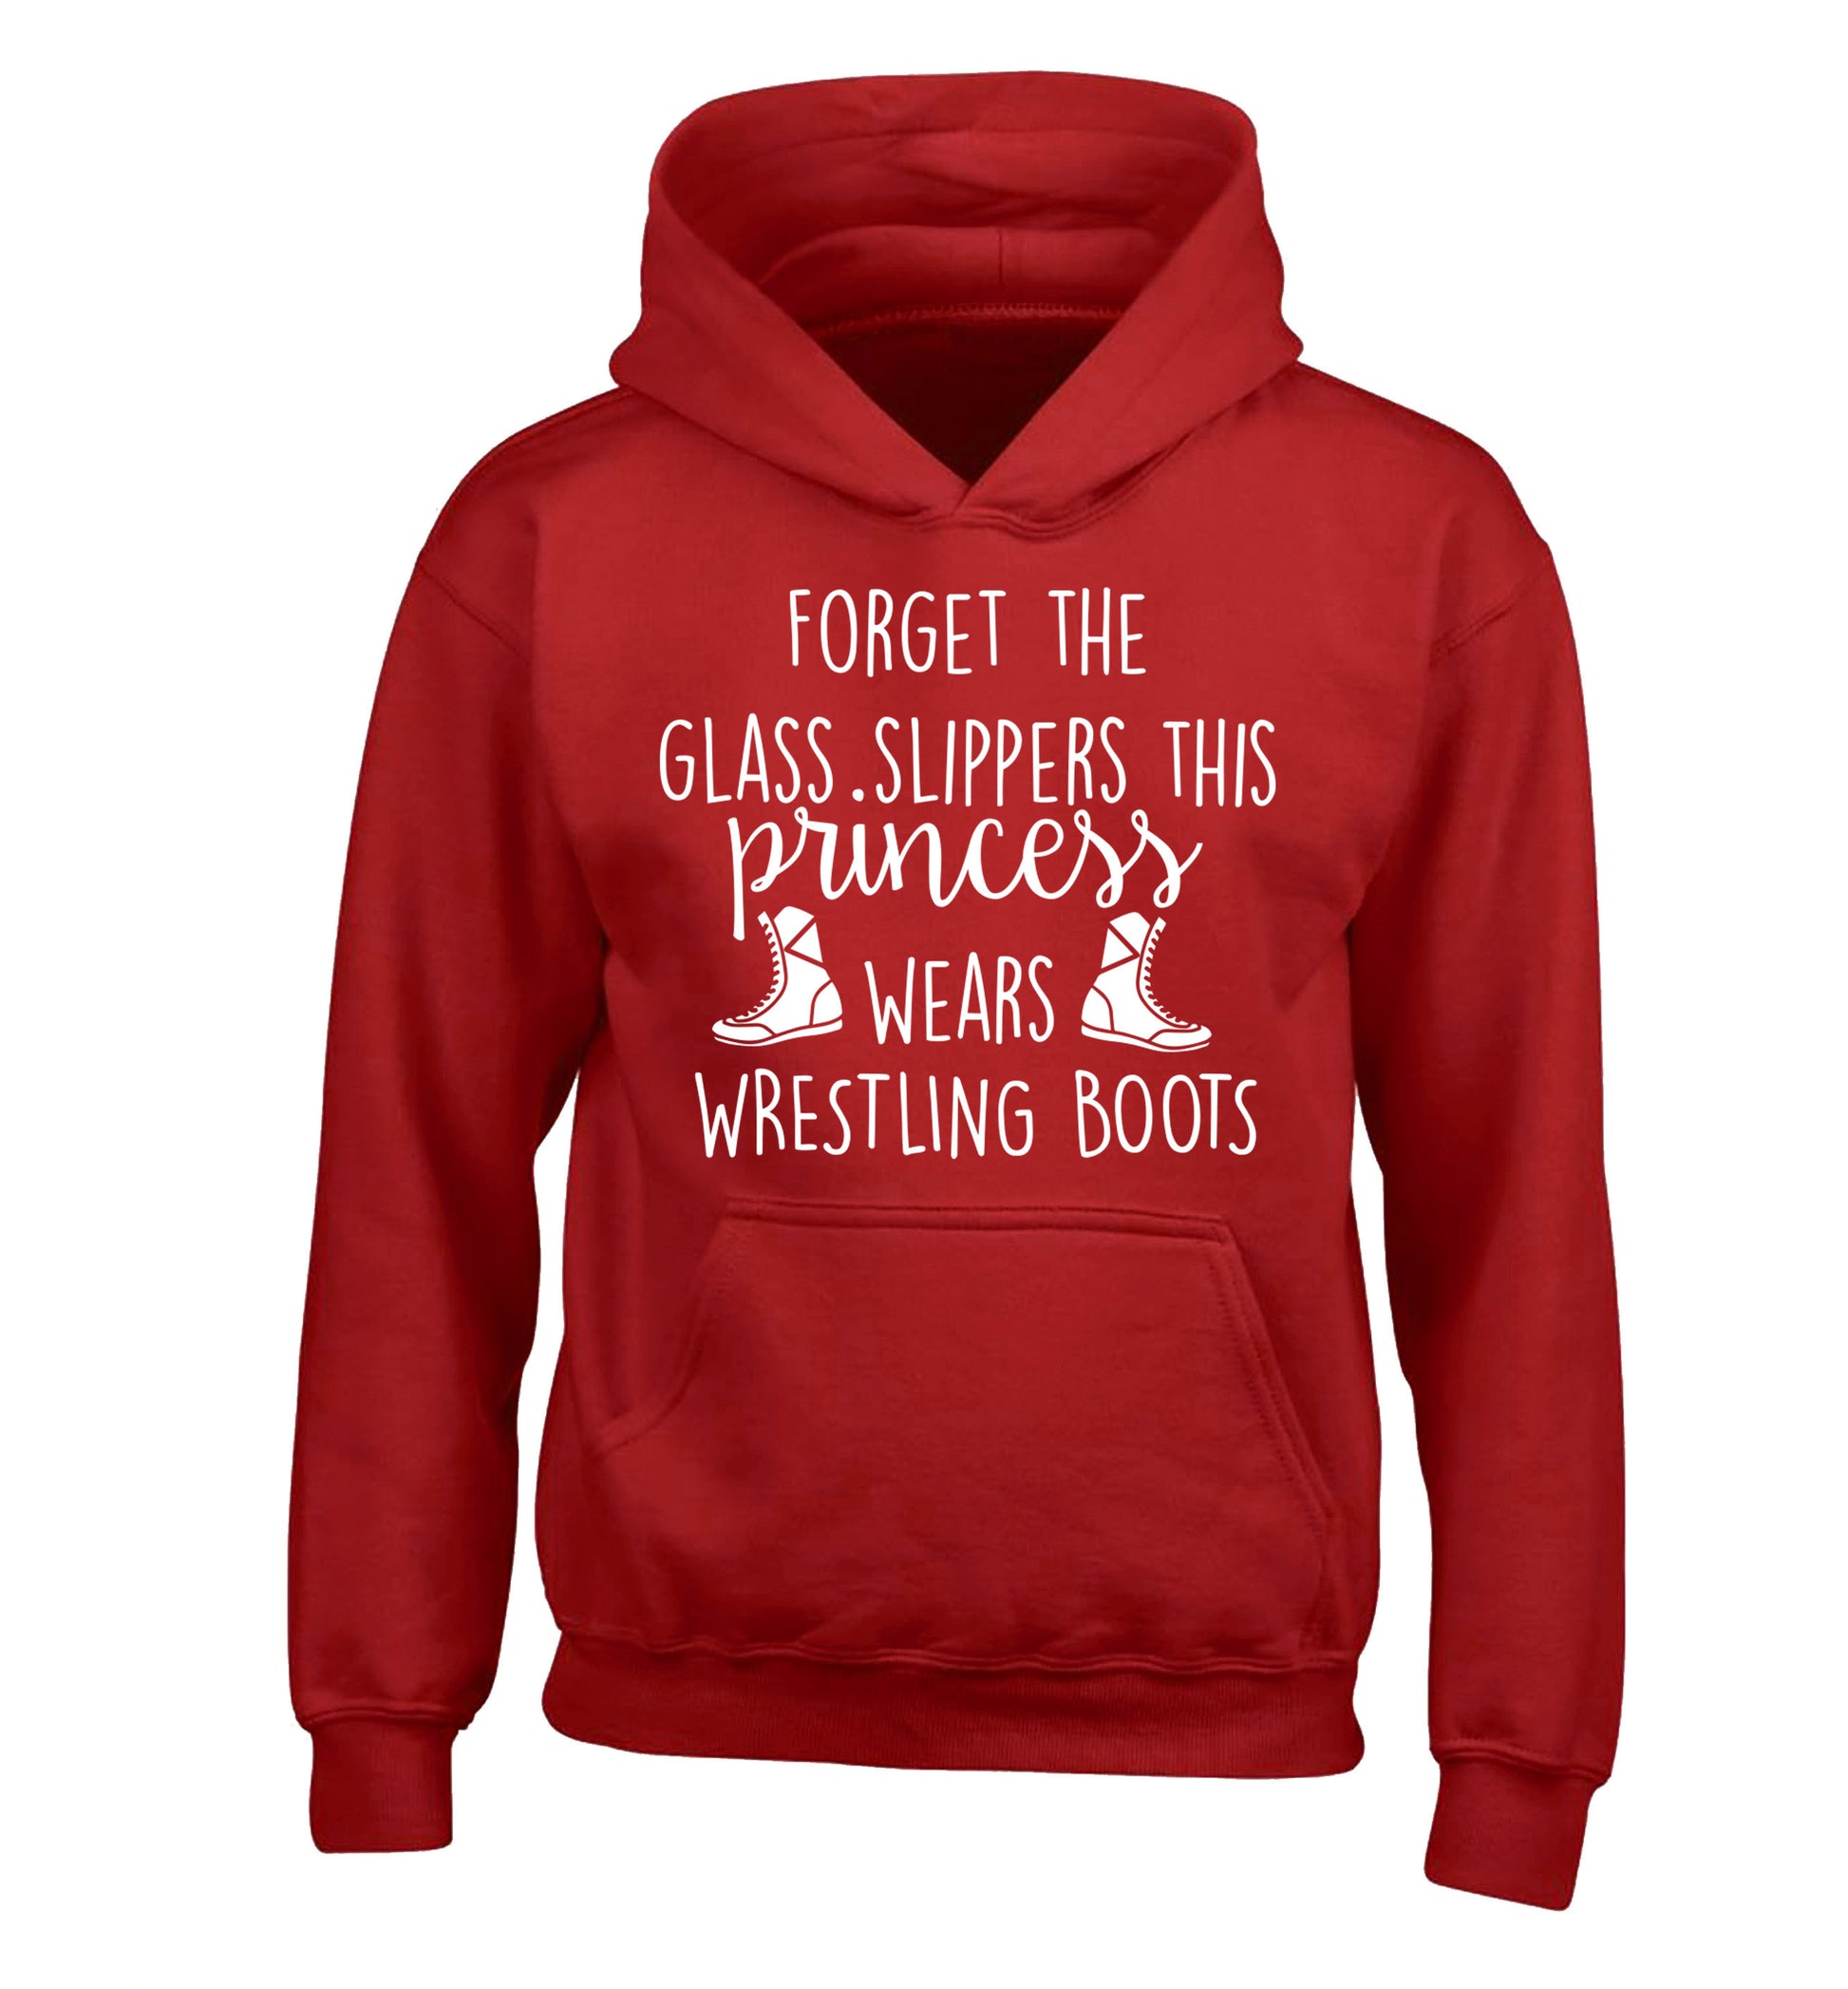 Forget the glass slippers this princess wears wrestling boots children's red hoodie 12-14 Years